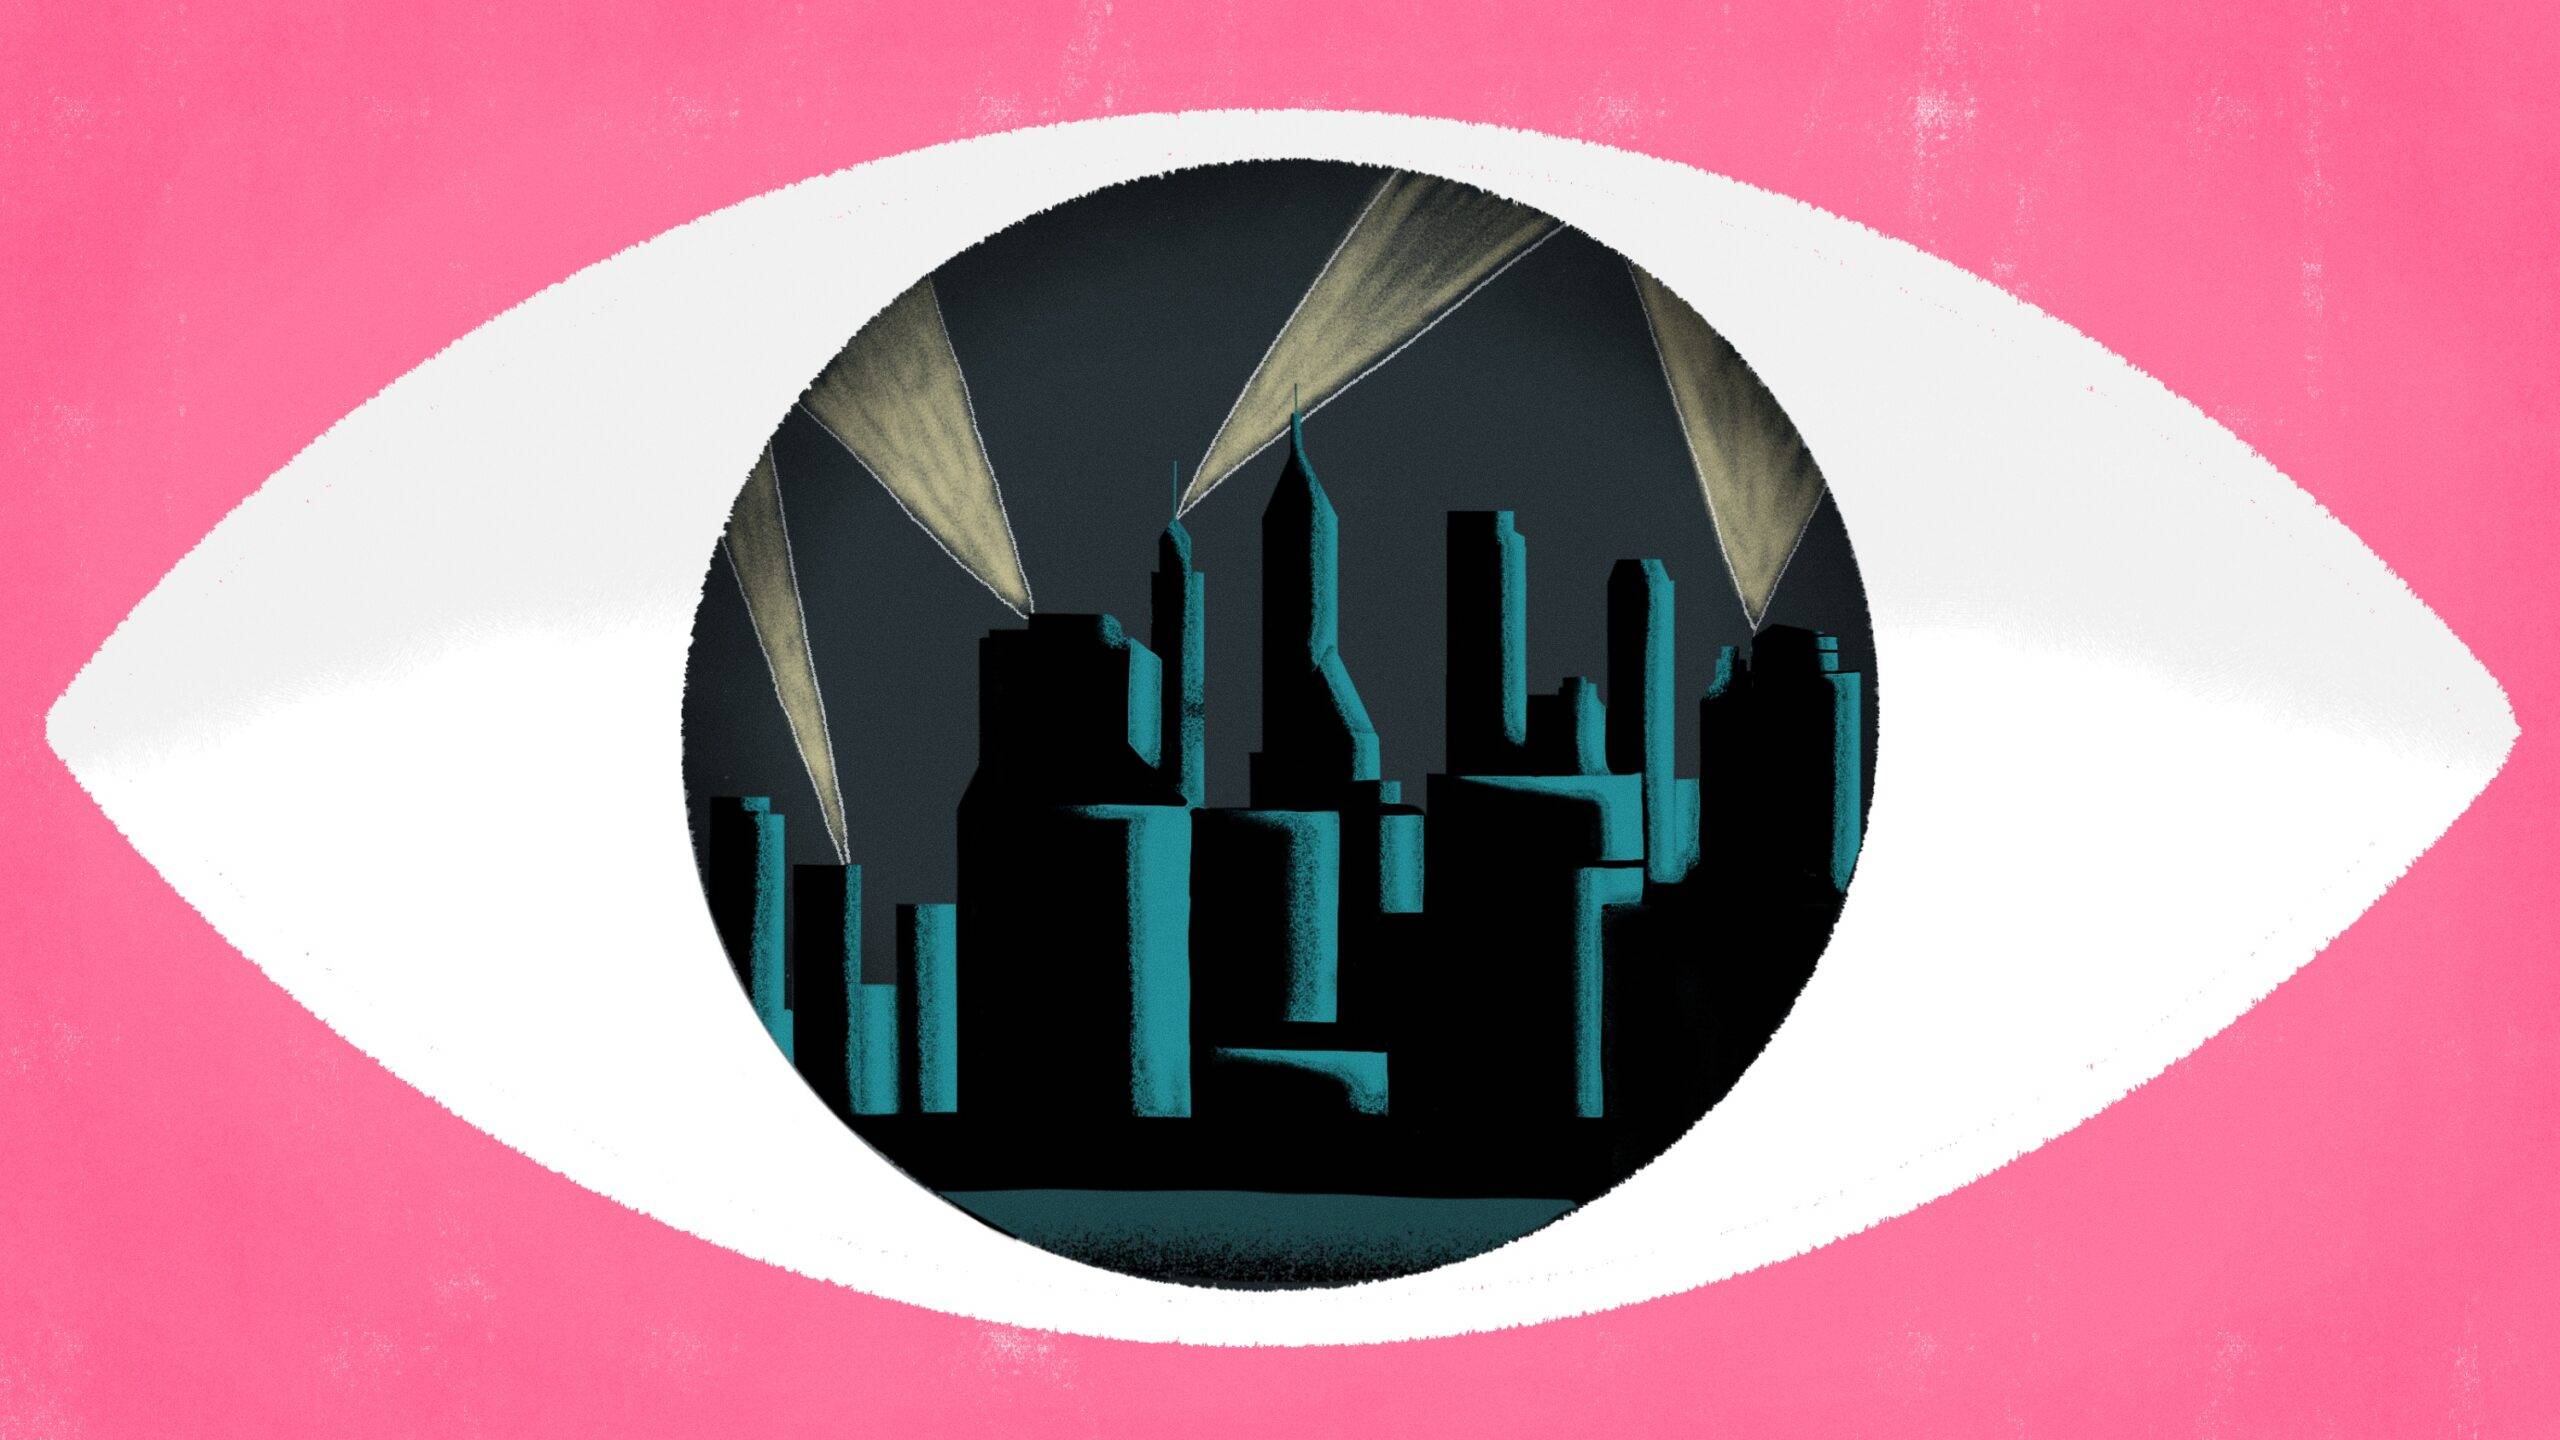 A city skyline filled with spotlights, in the center of an eye.